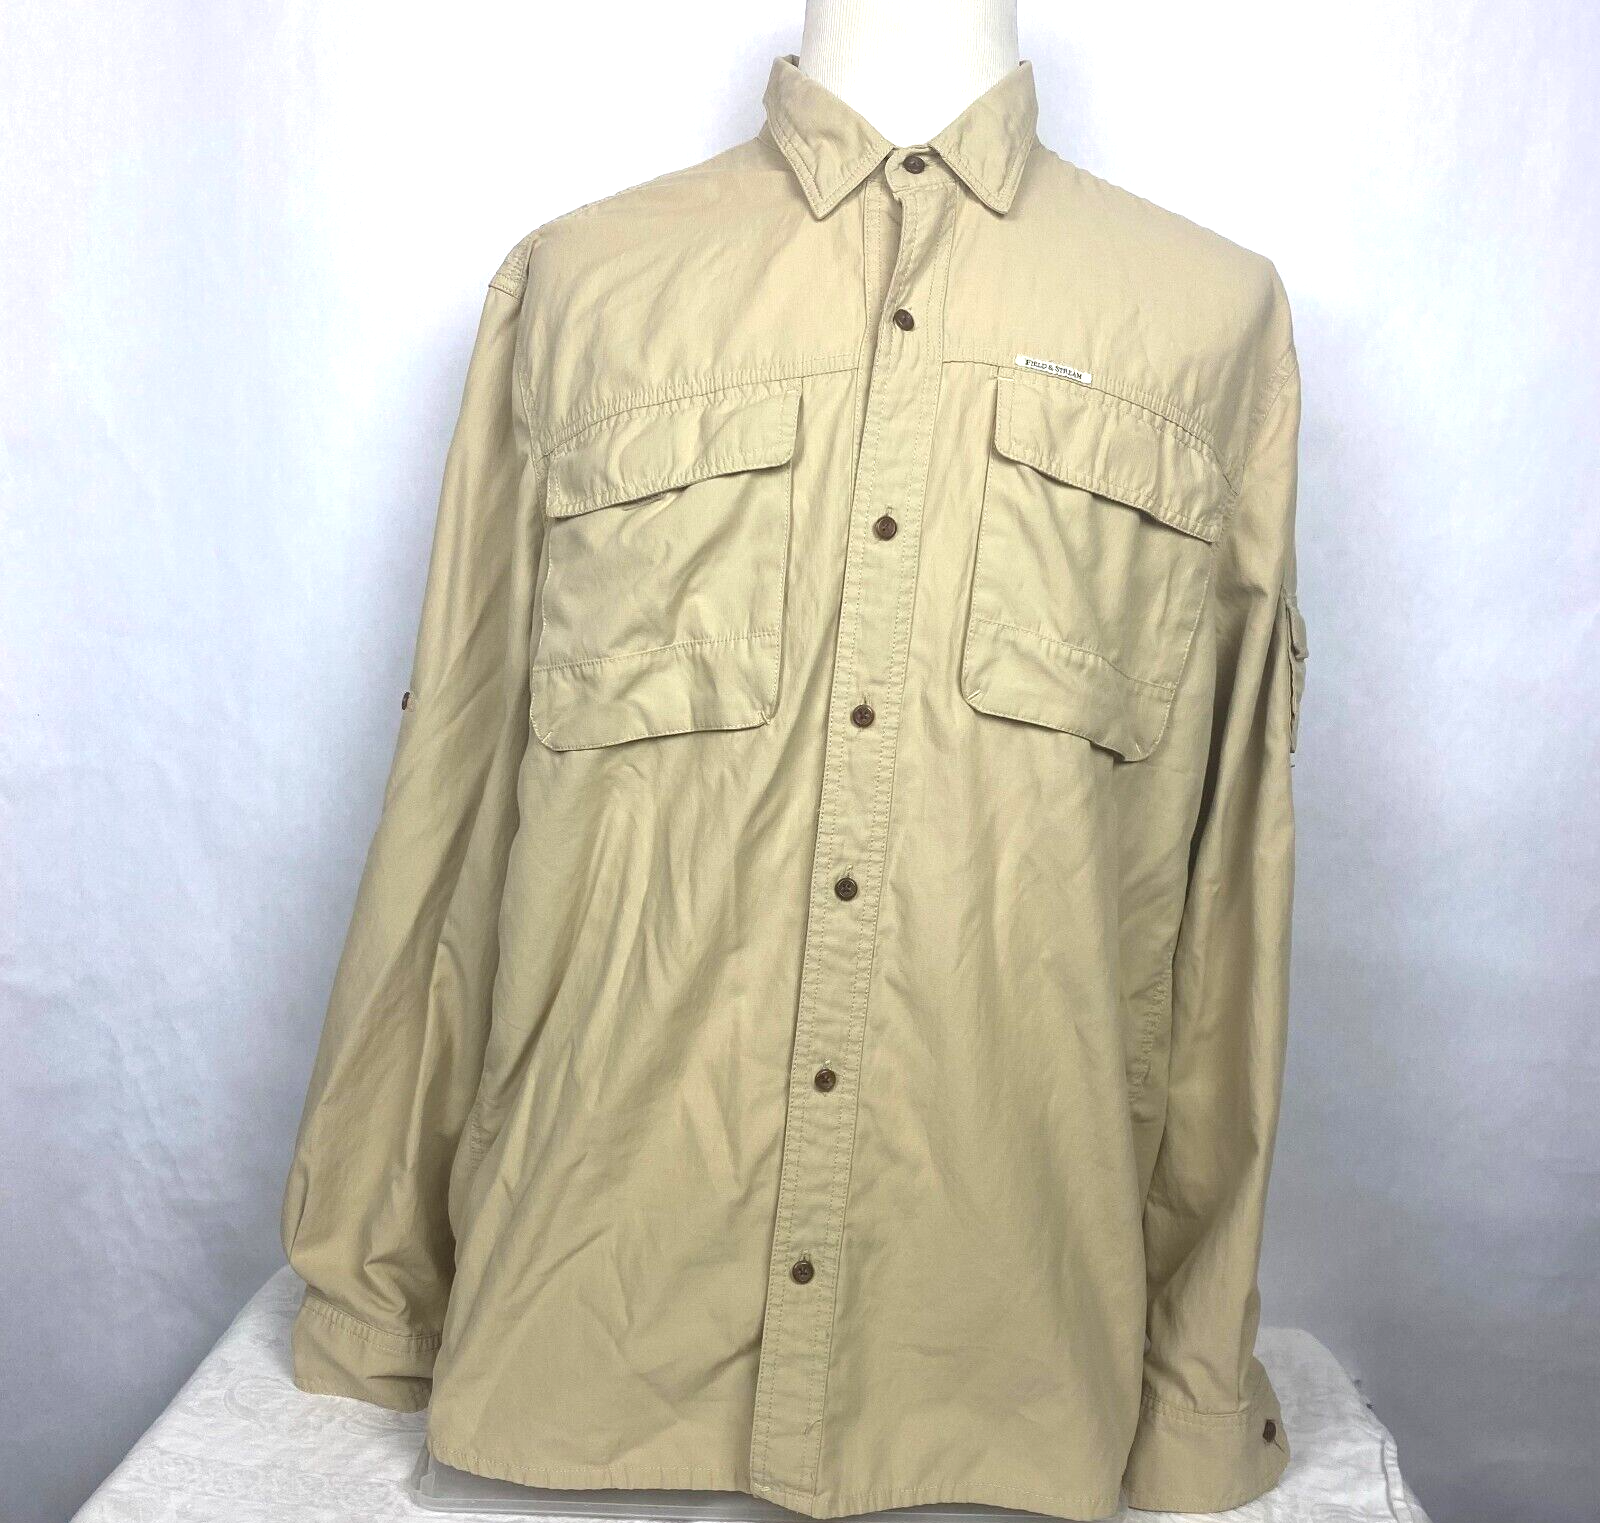 Primary image for Field & Stream Men's Yellow Cream Sleeve Vented Fishing Long Shirt Size 2XL